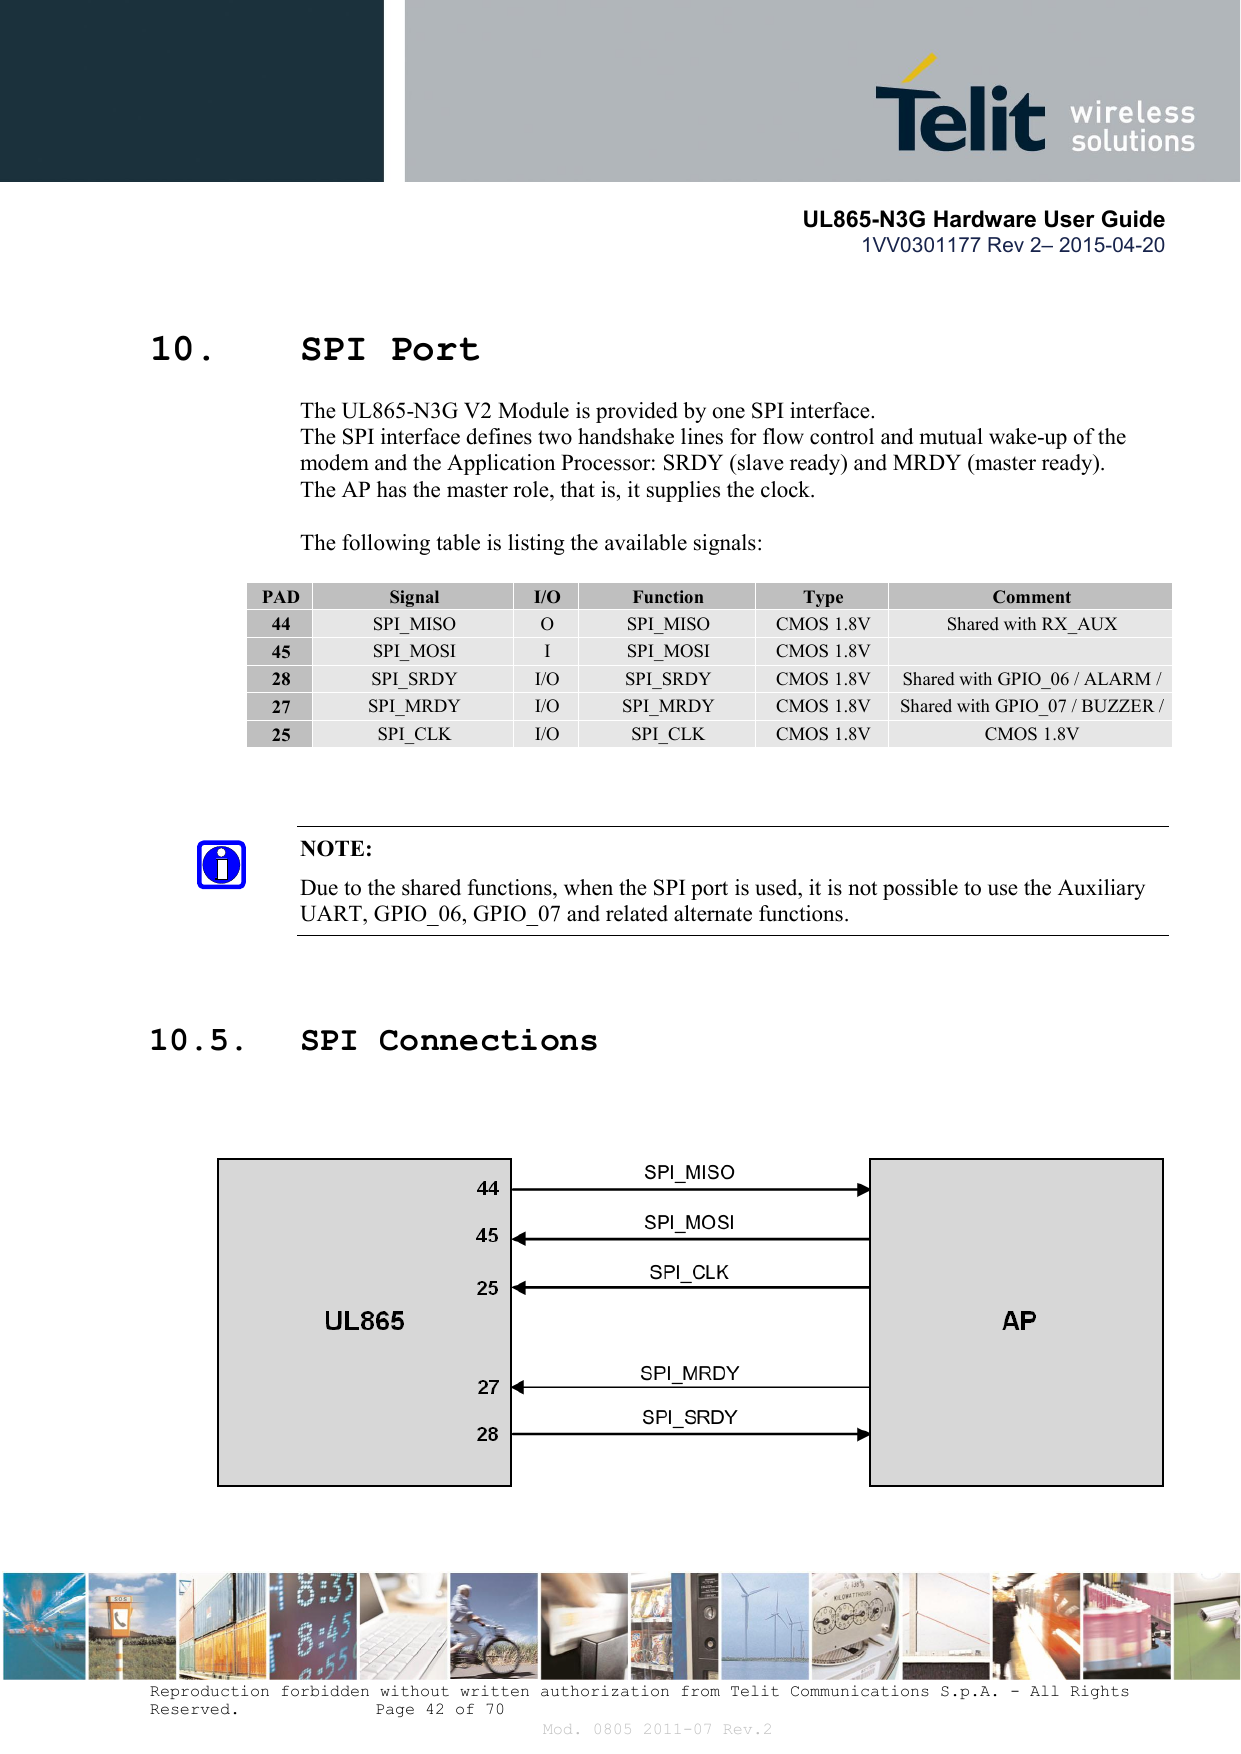       UL865-N3G Hardware User Guide 1VV0301177 Rev 2– 2015-04-20  Reproduction forbidden without written authorization from Telit Communications S.p.A. - All Rights Reserved.    Page 42 of 70 Mod. 0805 2011-07 Rev.2  10. SPI Port The UL865-N3G V2 Module is provided by one SPI interface. The SPI interface defines two handshake lines for flow control and mutual wake-up of the  modem and the Application Processor: SRDY (slave ready) and MRDY (master ready). The AP has the master role, that is, it supplies the clock.  The following table is listing the available signals:  PAD  Signal  I/O  Function  Type  Comment 44  SPI_MISO  O  SPI_MISO  CMOS 1.8V  Shared with RX_AUX 45  SPI_MOSI  I  SPI_MOSI  CMOS 1.8V   28  SPI_SRDY  I/O  SPI_SRDY  CMOS 1.8V  Shared with GPIO_06 / ALARM / 27  SPI_MRDY  I/O  SPI_MRDY  CMOS 1.8V  Shared with GPIO_07 / BUZZER / 25  SPI_CLK  I/O  SPI_CLK  CMOS 1.8V  CMOS 1.8V   NOTE: Due to the shared functions, when the SPI port is used, it is not possible to use the Auxiliary UART, GPIO_06, GPIO_07 and related alternate functions.  10.5. SPI Connections   